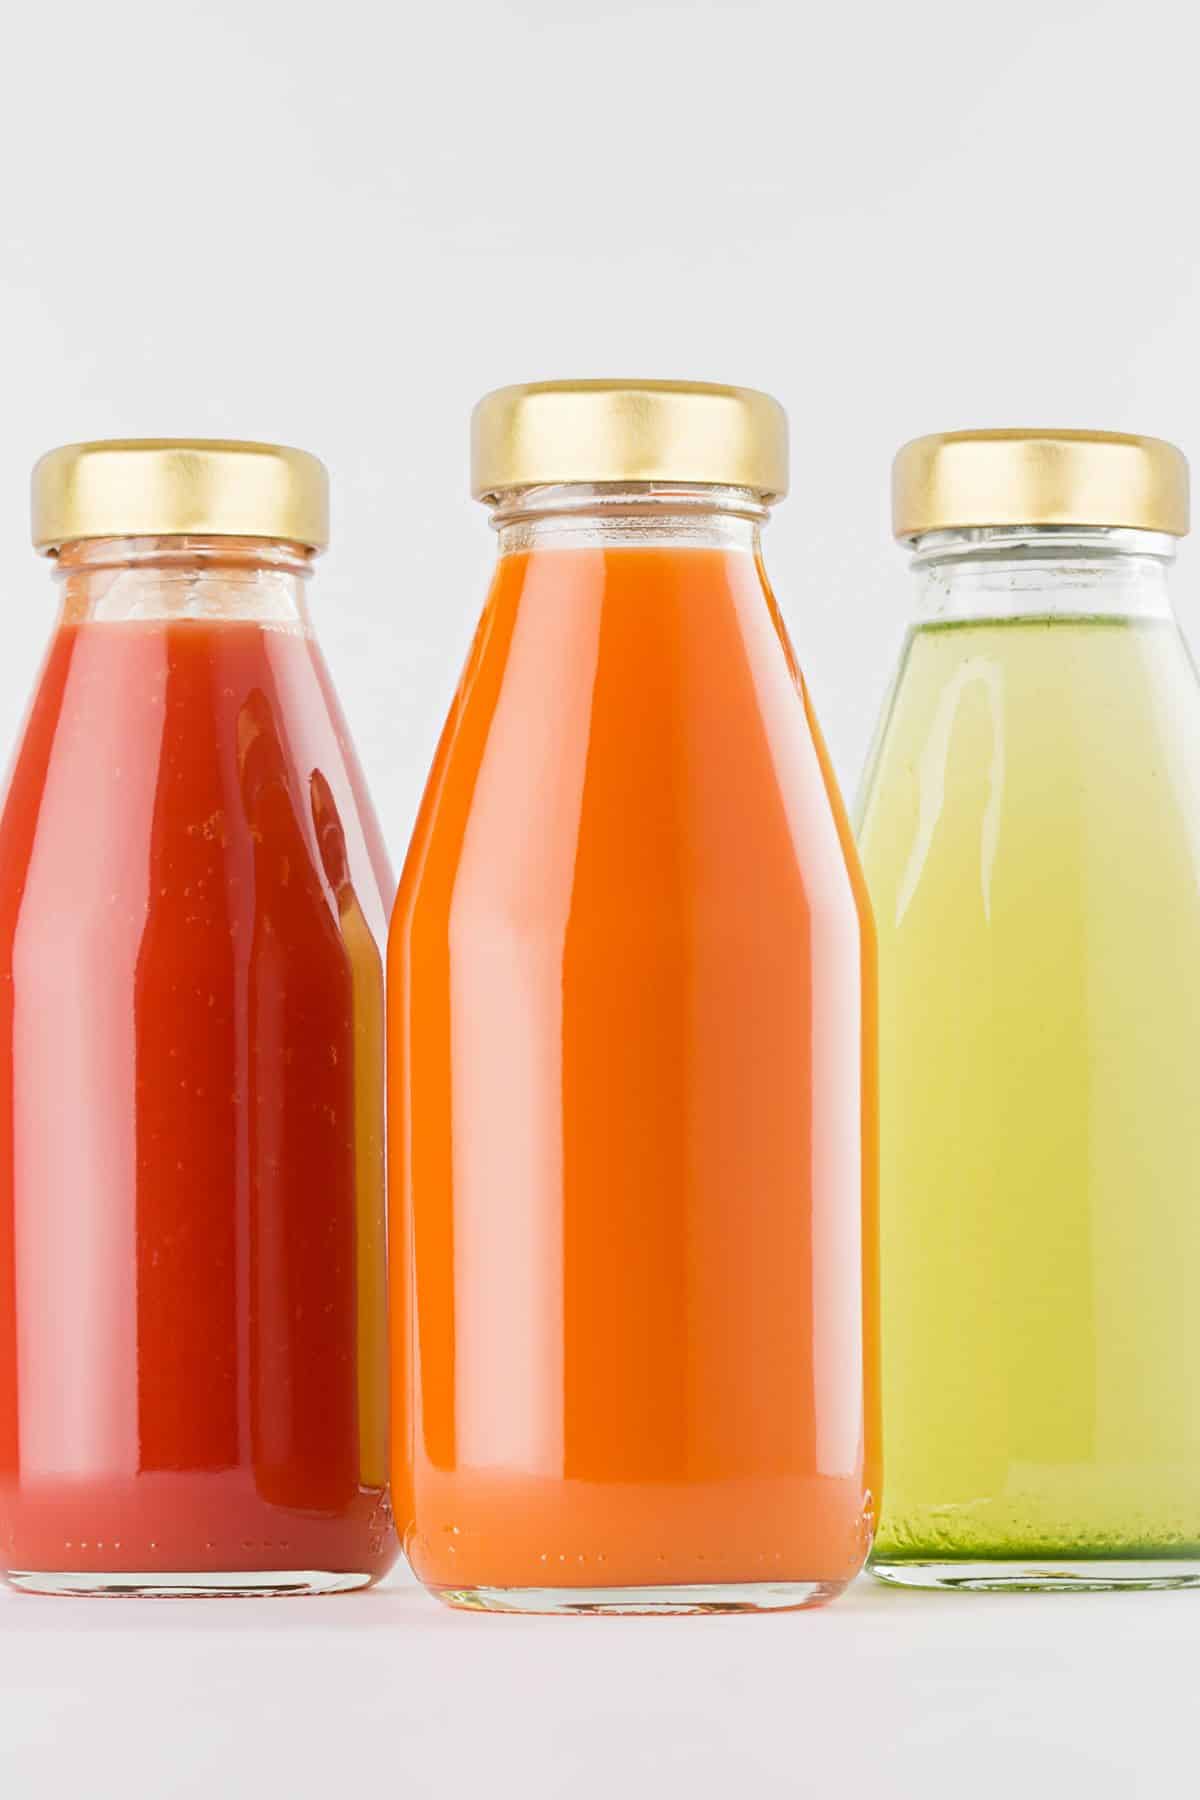 three bottles of various fruit juice concentrates.